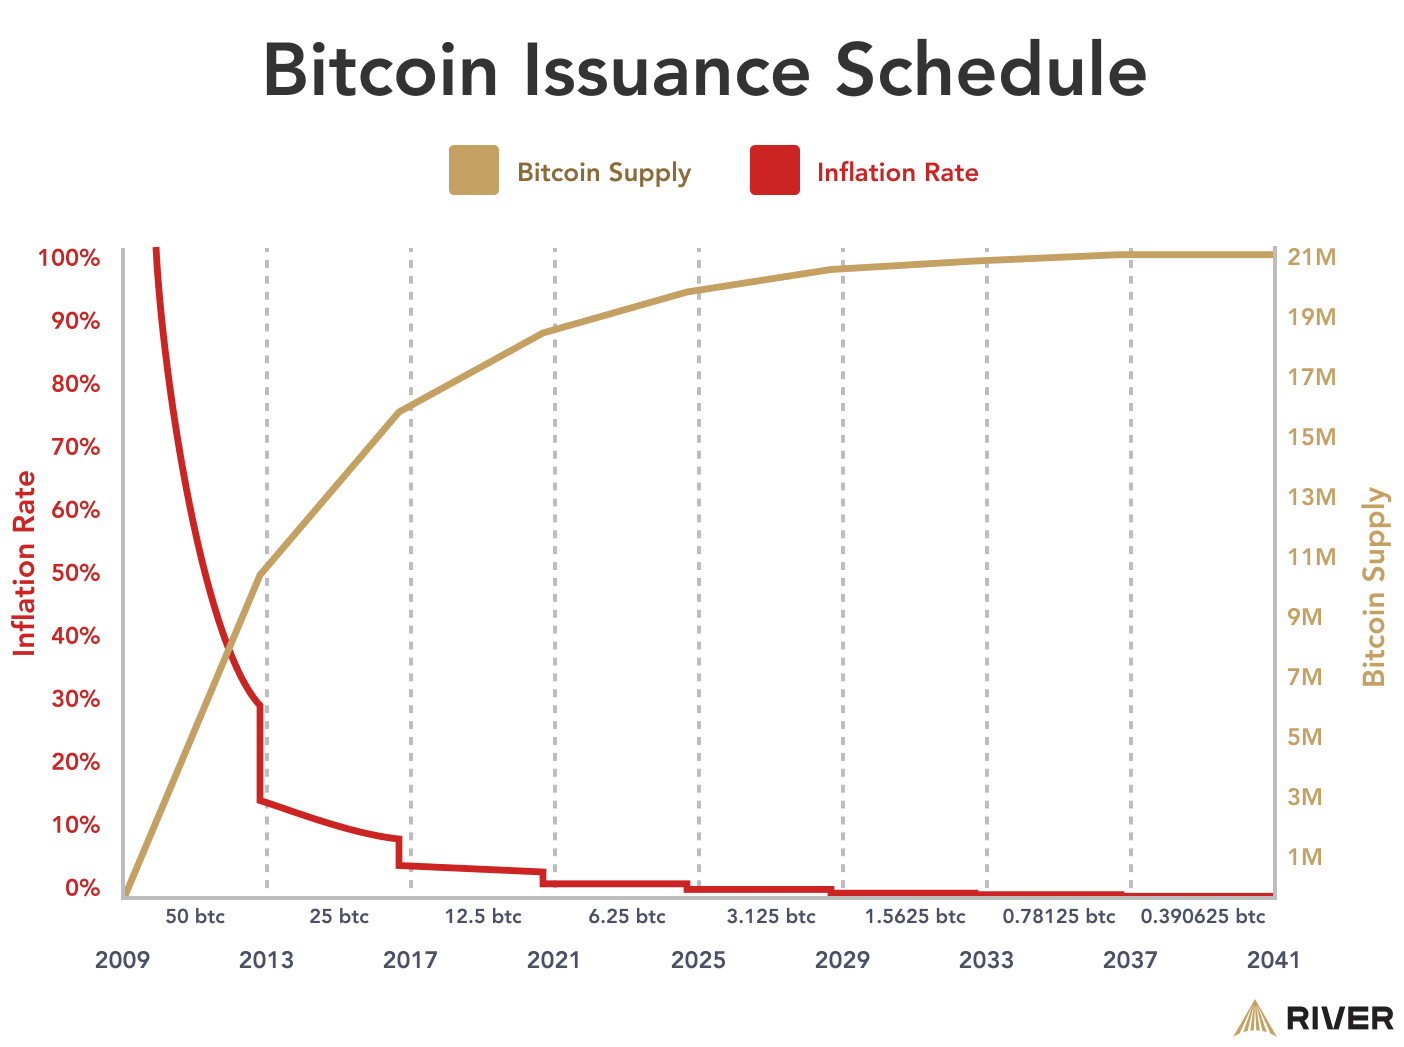 Bitcoin’s inflation rate is precisely known, both at the present and into the future.